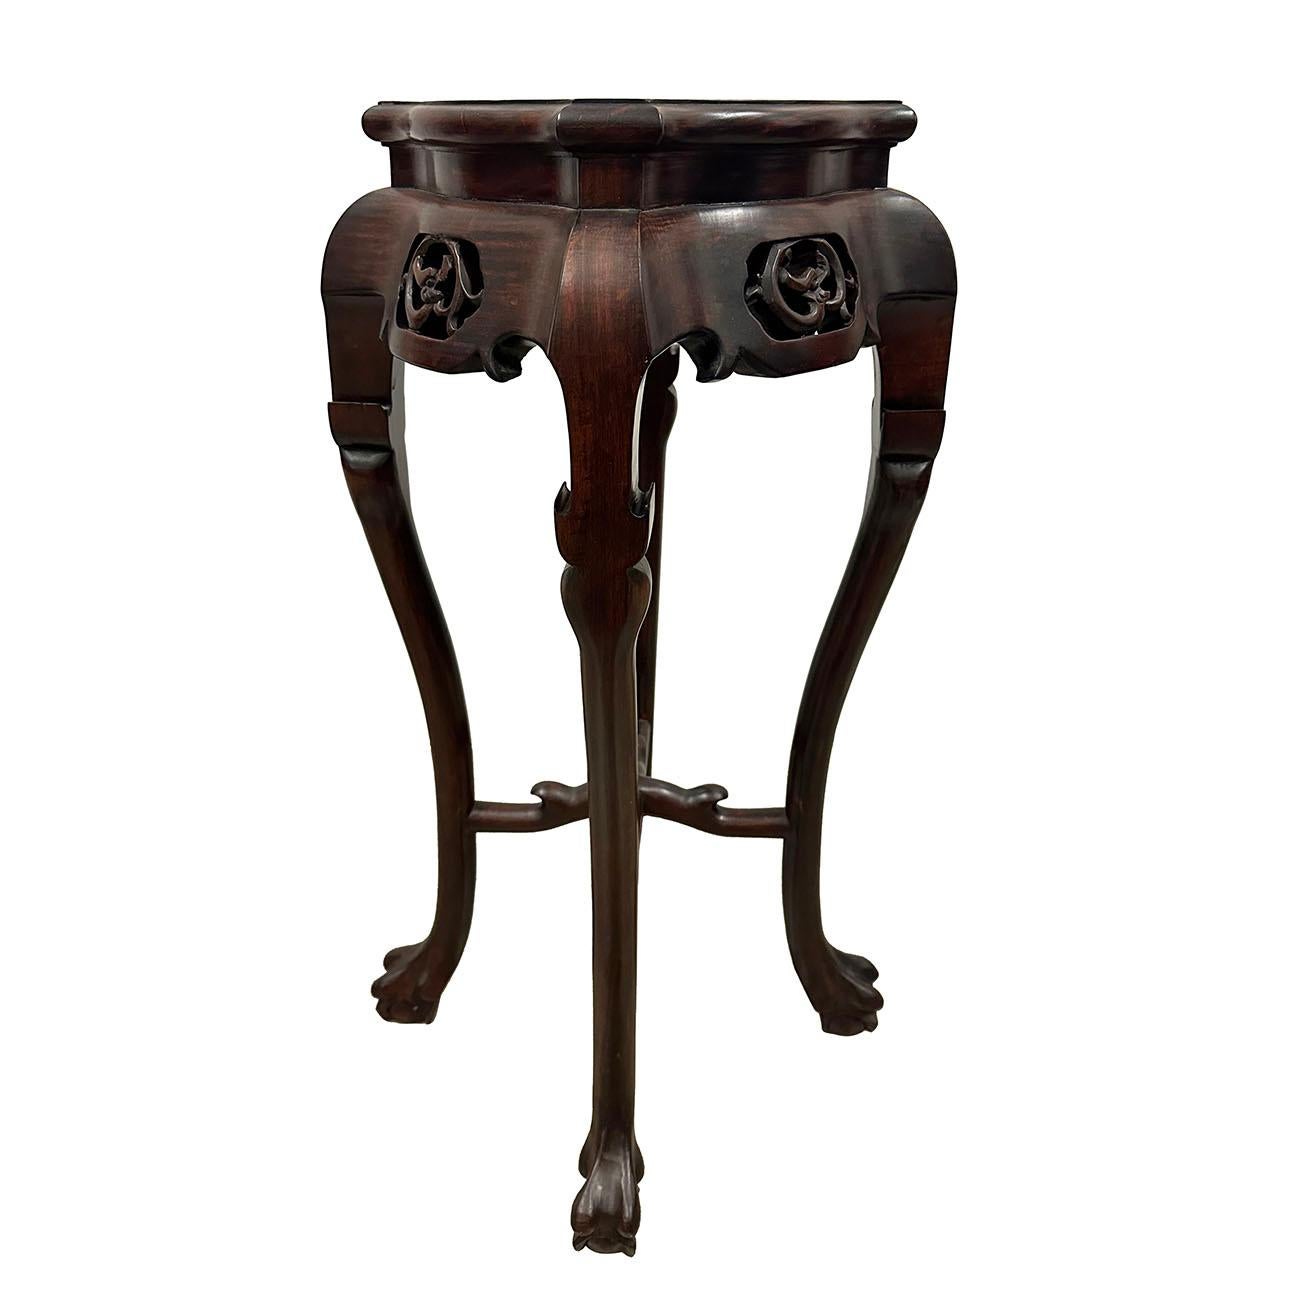 This Gorgeous Antique Chinese carved Rosewood Pedestal Table/Plant Stand was hand made from solid Rosewood with traditional carving works design of dragon symbols on the shoulder of the tables. Look at the pictures, you can see that this pedestal